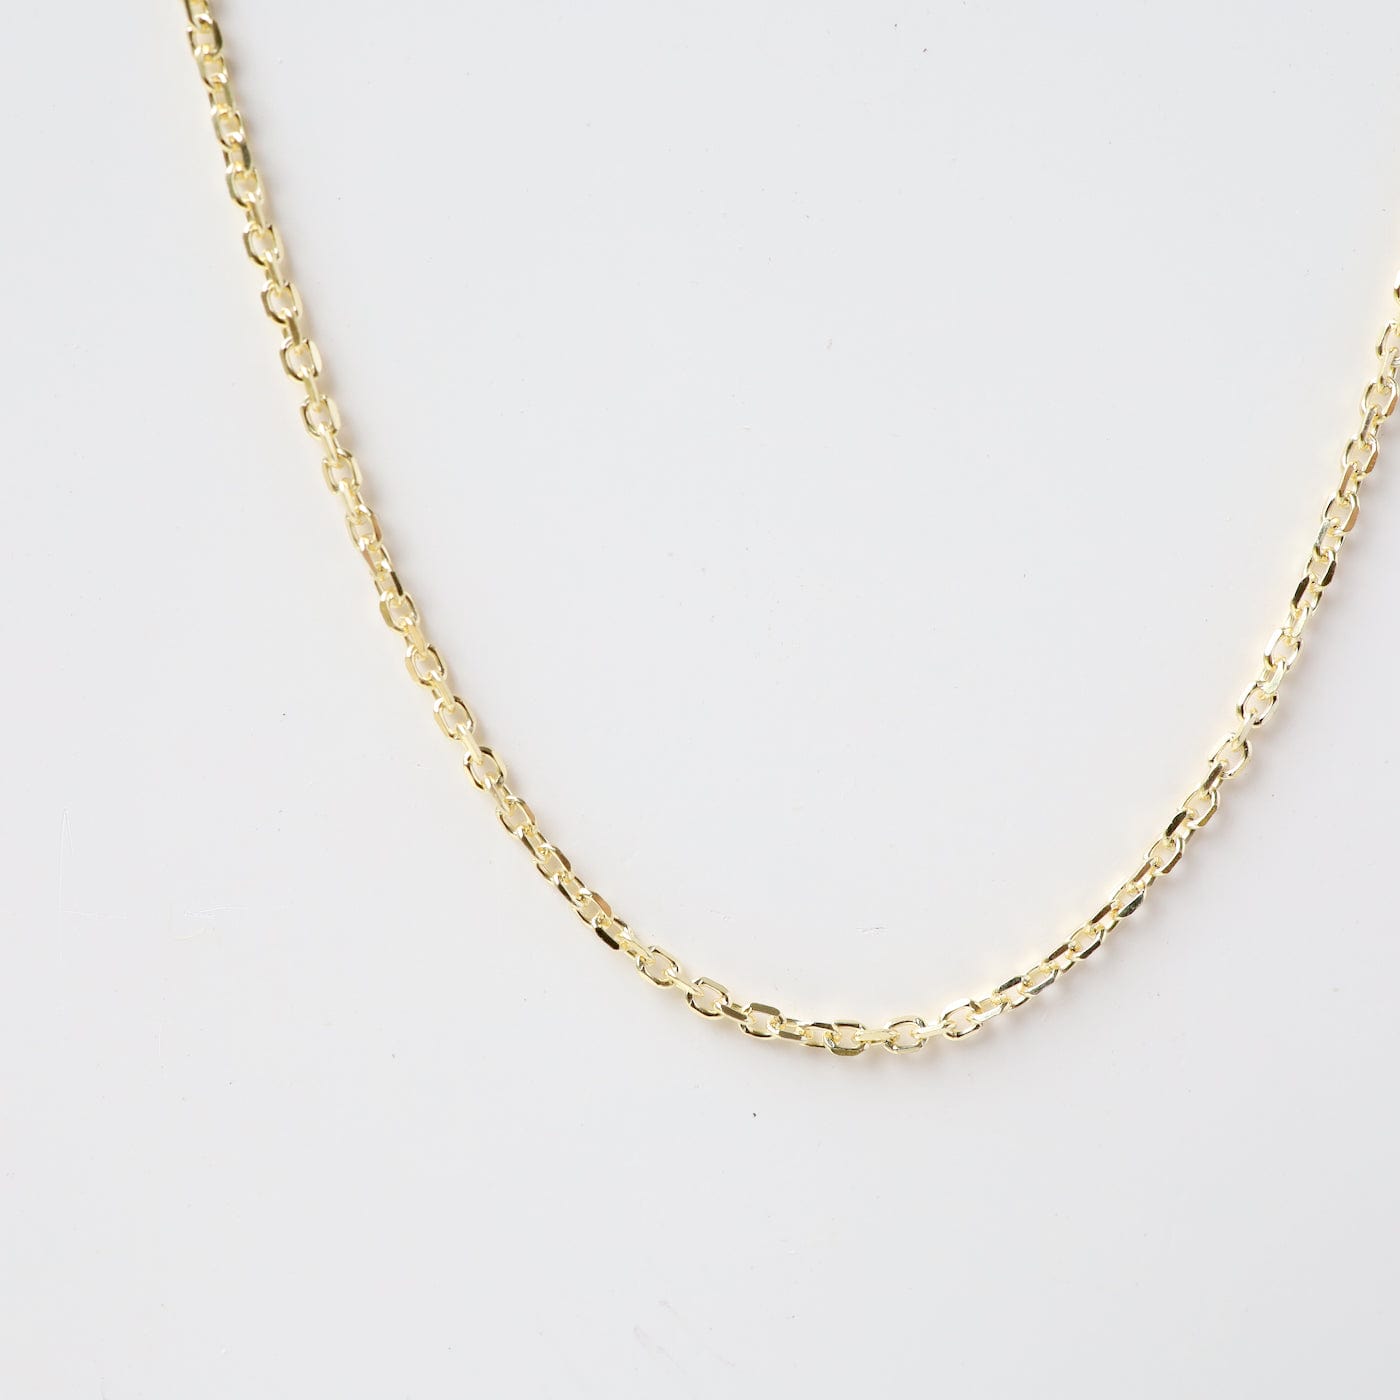 CHN Gold Plated Cable Chain - 20"